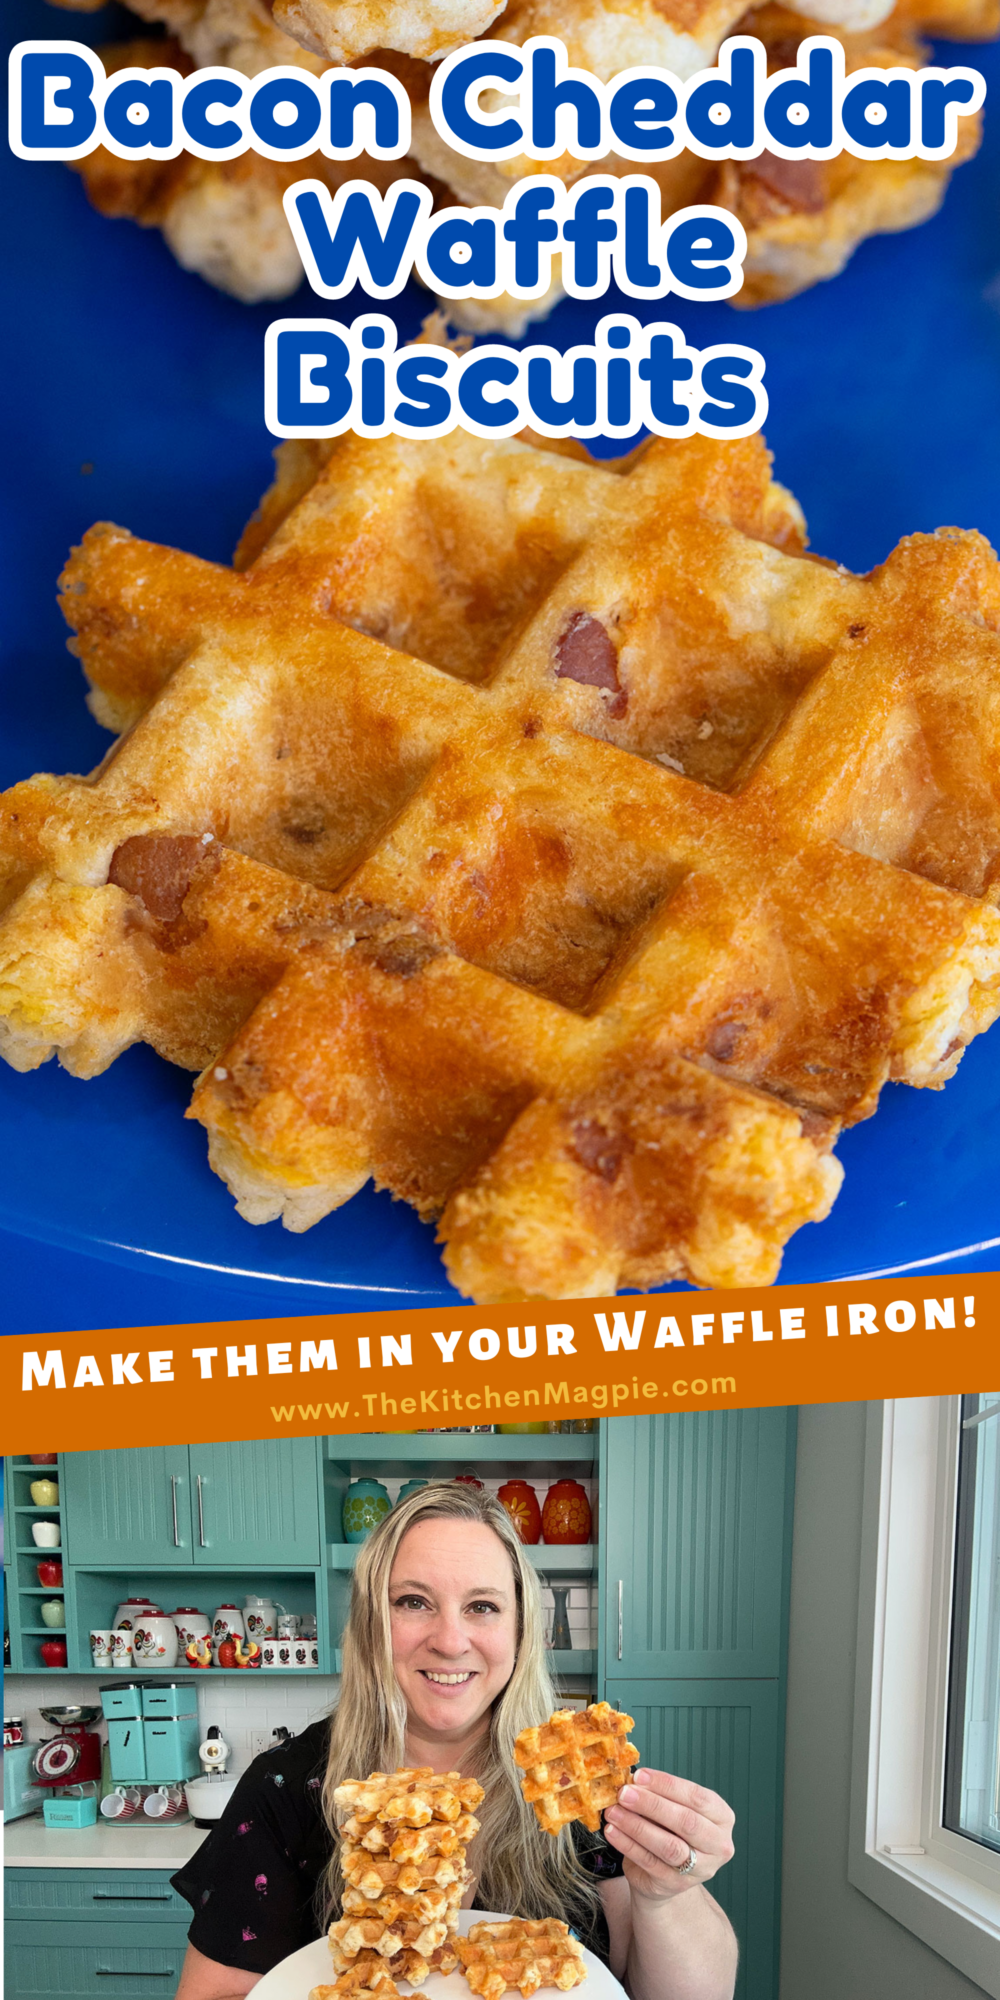 Biscuit dough is loaded up with bacon and cheddar cheese than grilled up in your waffle iron! Easy and delicious.